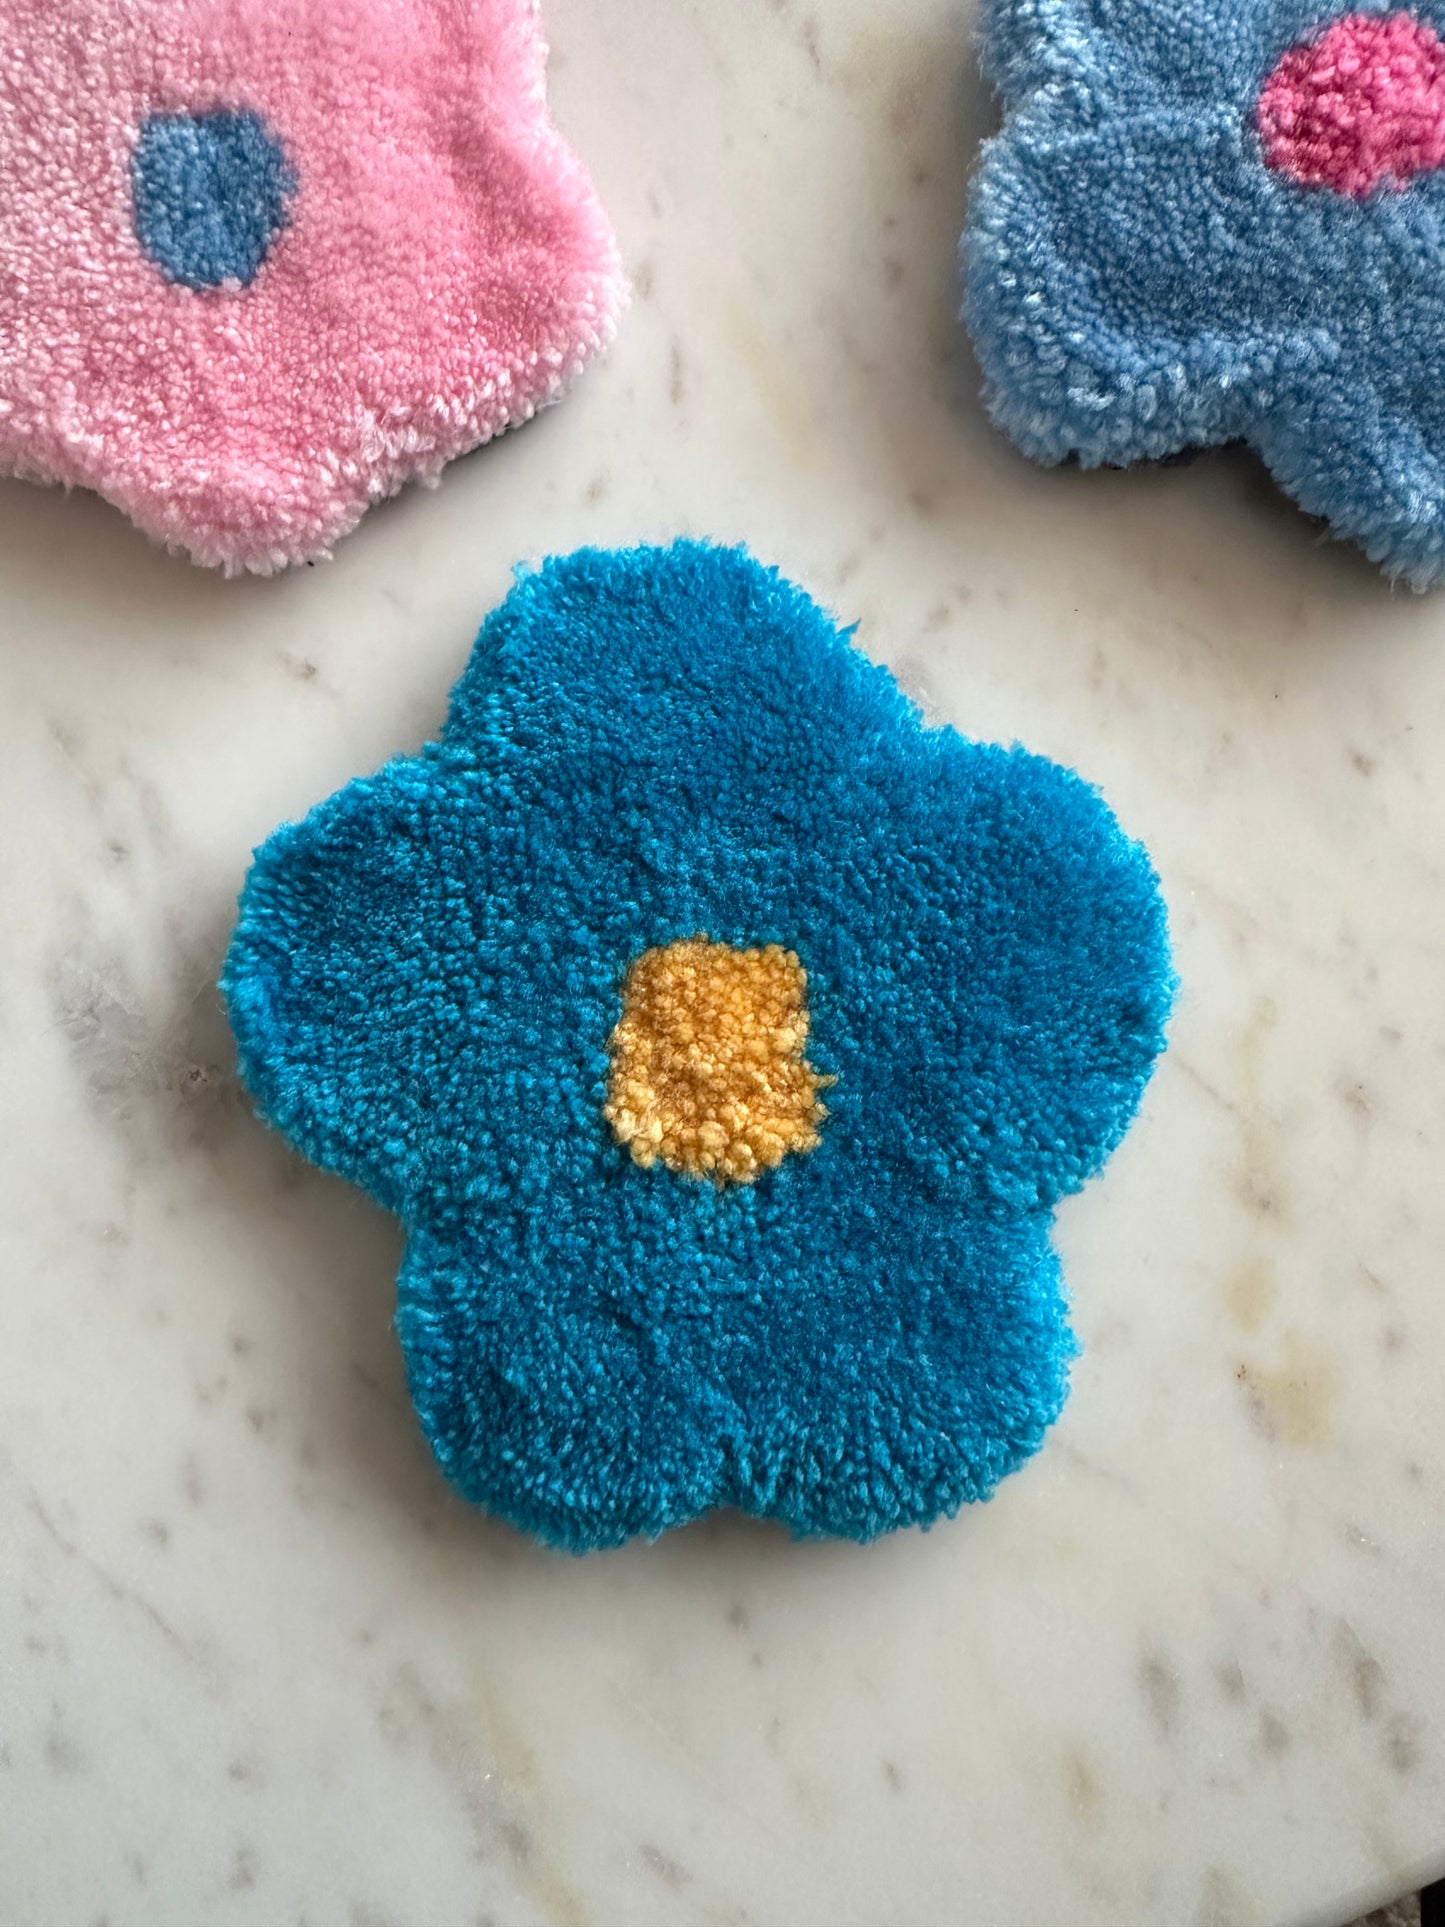 Shows one of our tufted flower coasters with blue petals and a yellow core. Made by The Woollers